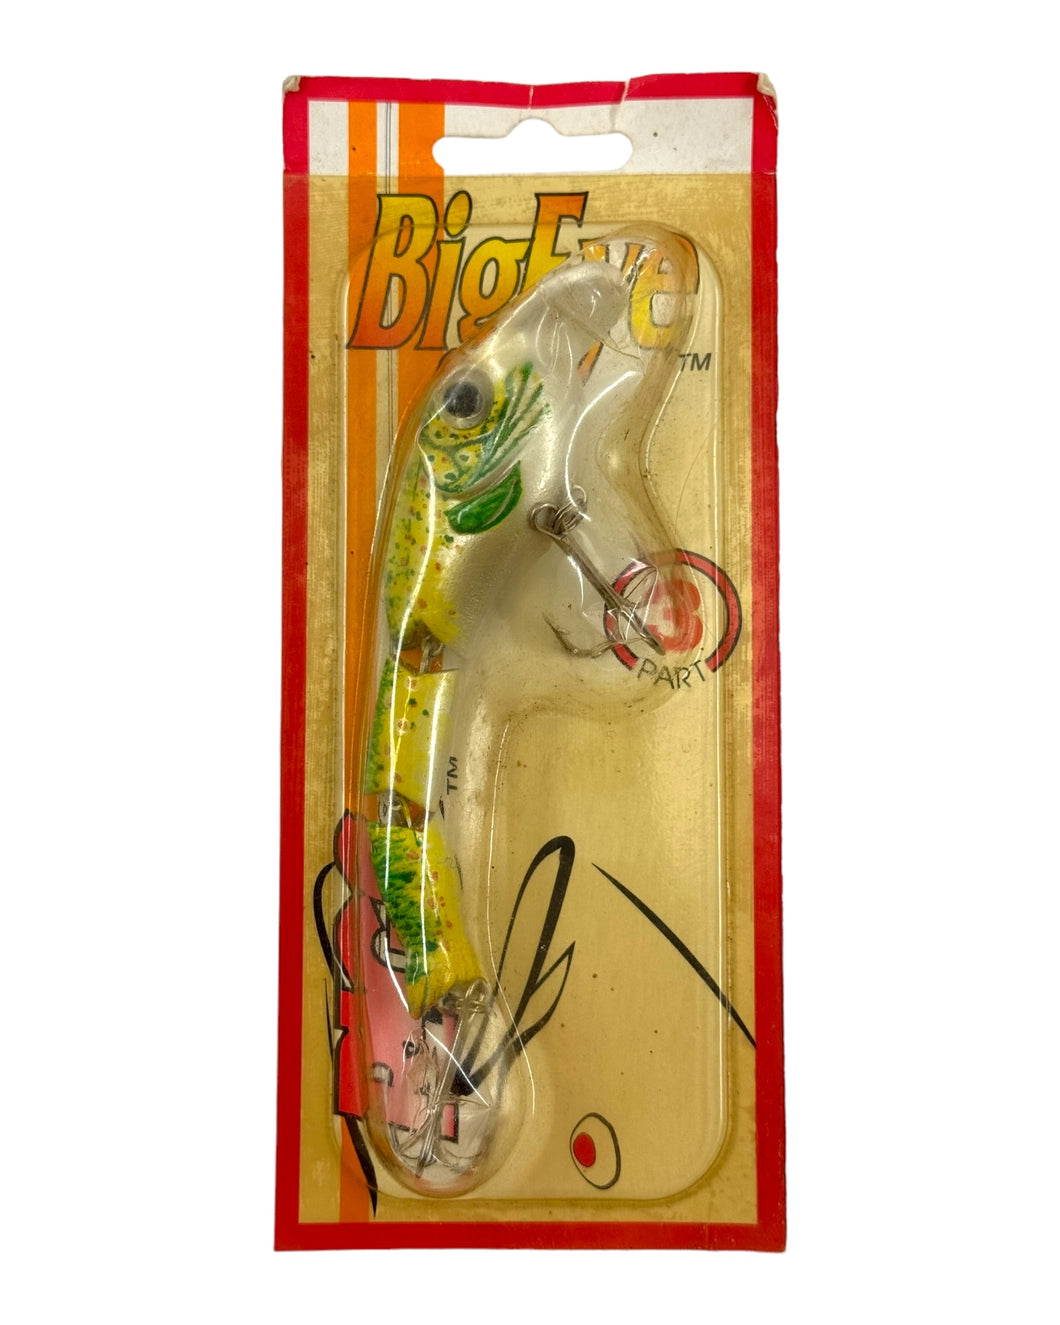 RIGS TACKLE BIGEYE ARTICULATED FISHING LURE